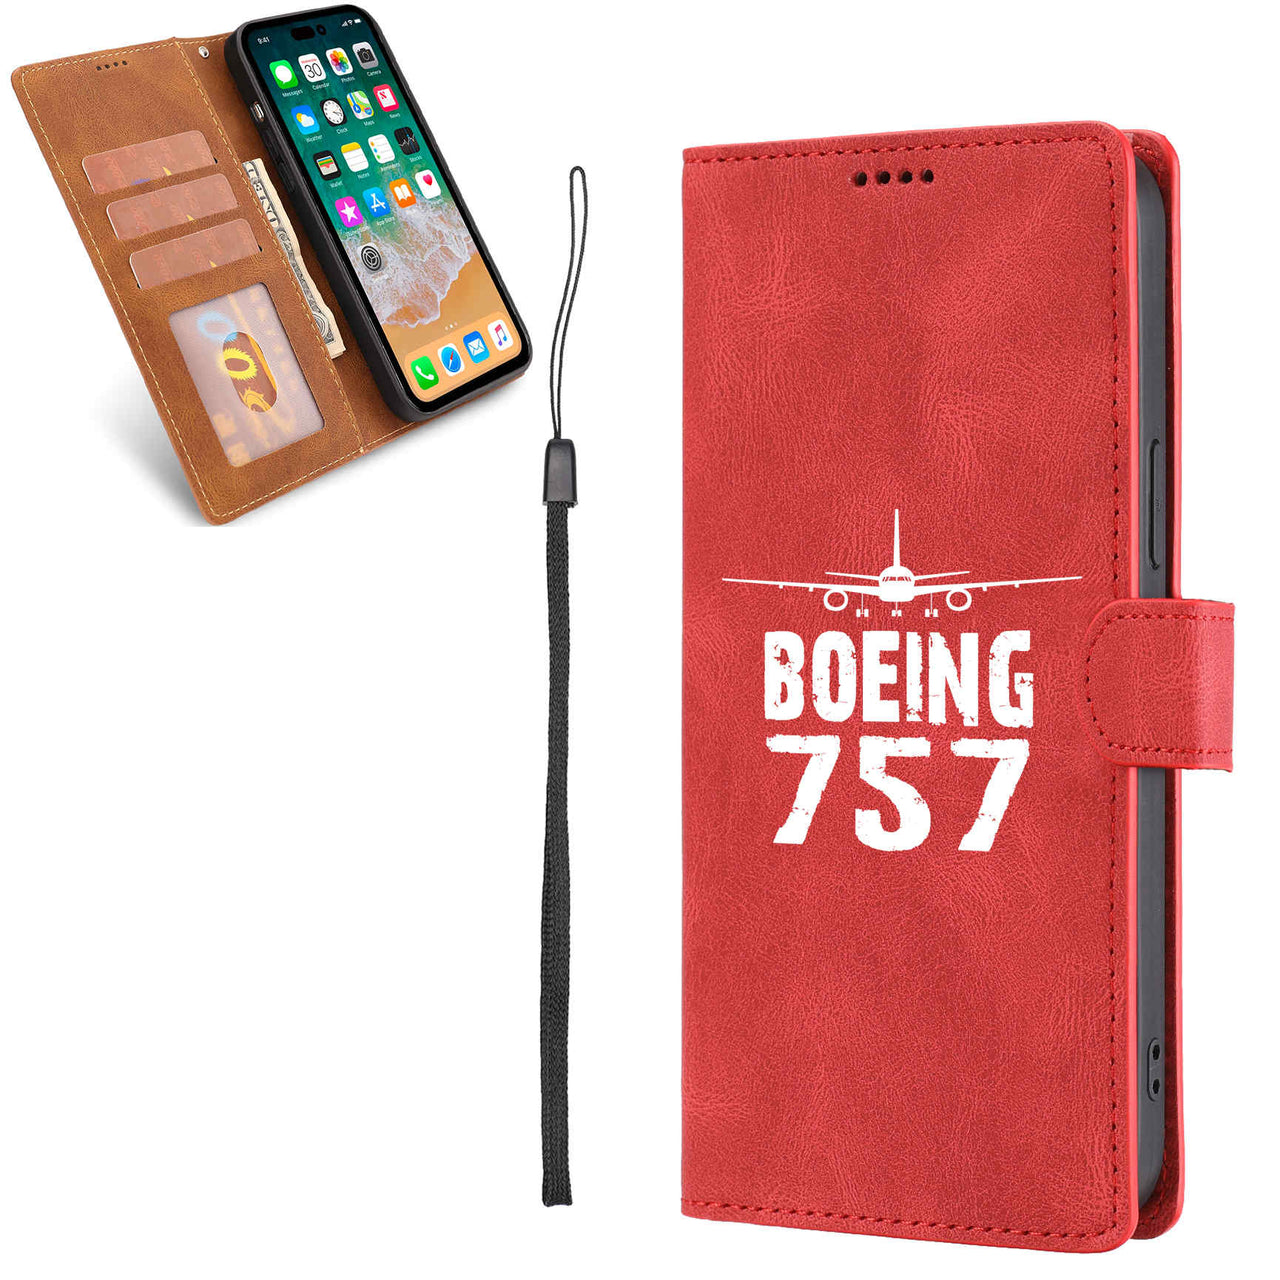 Boeing 757 & Plane Designed Leather Samsung S & Note Cases